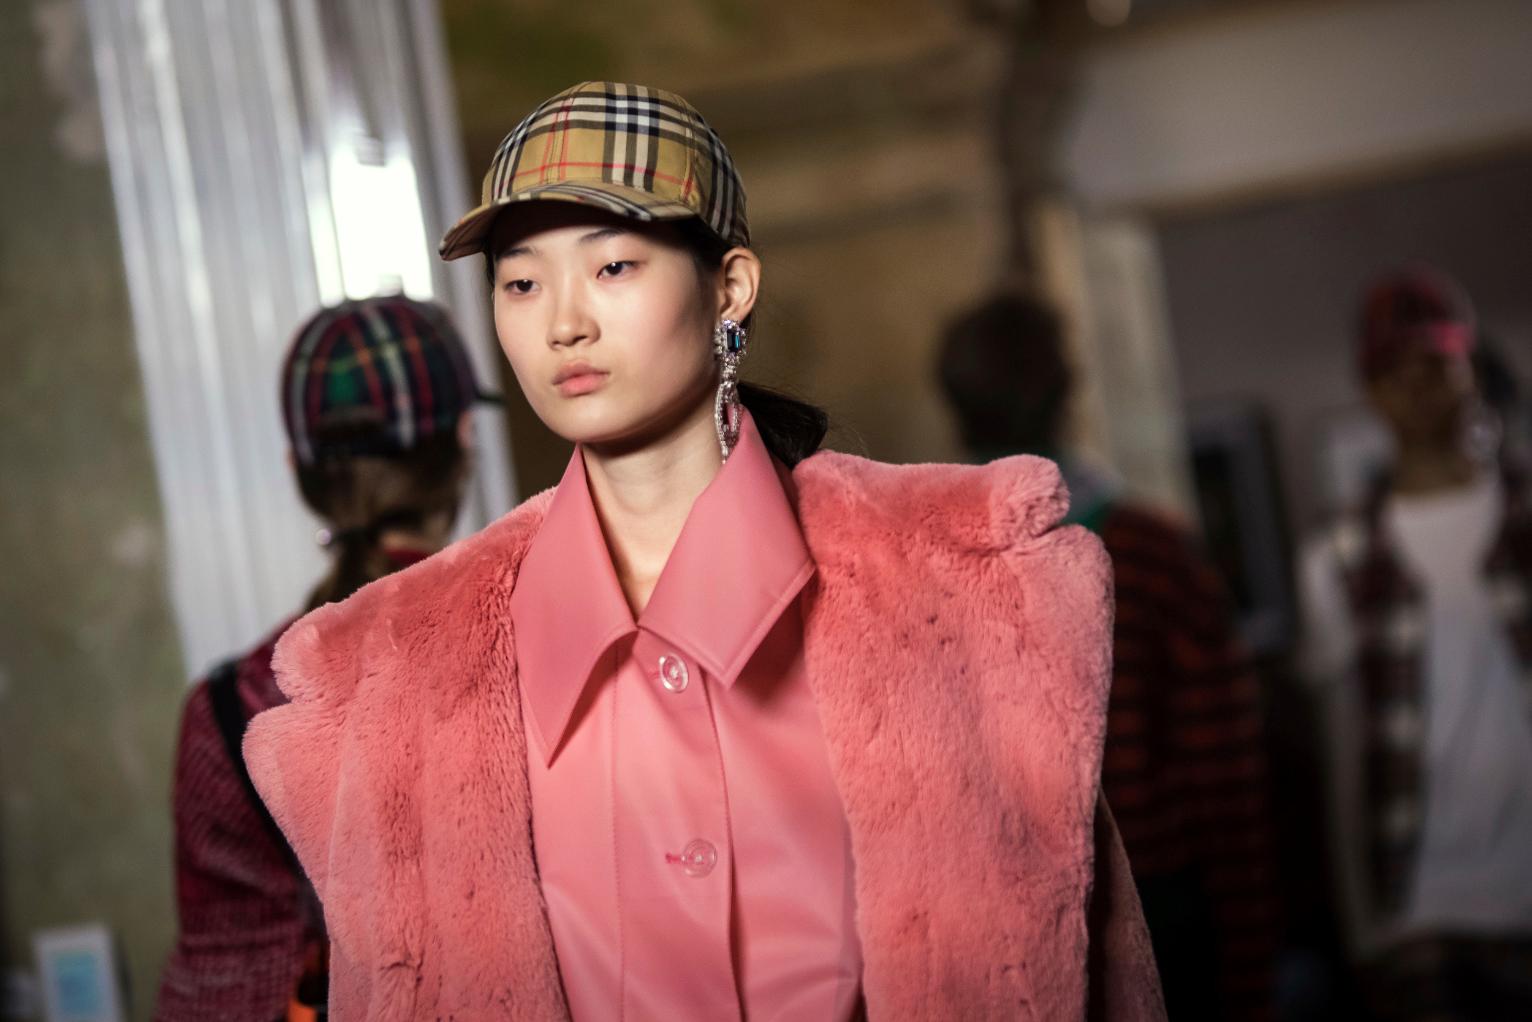 Burberry Unveils Spring 2018 Collection At London Fashion | News - Conversations About HER